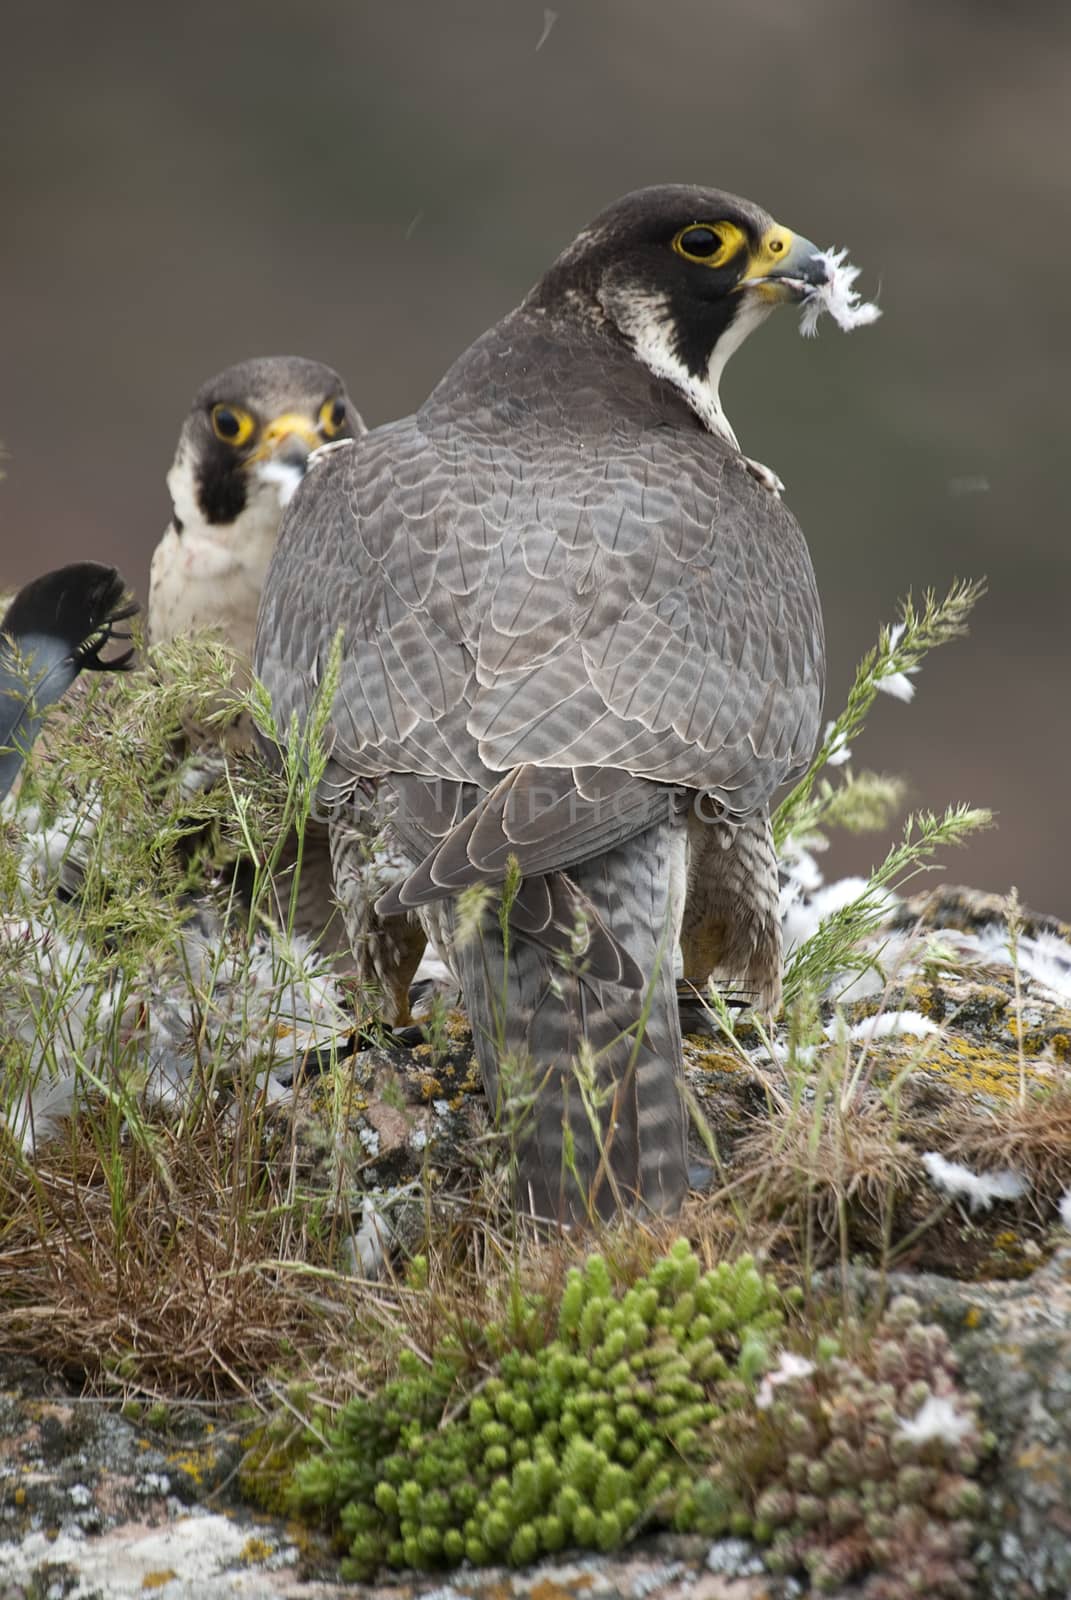 Peregrine falcon on the rock. Bird of prey, Couple sharing their by jalonsohu@gmail.com